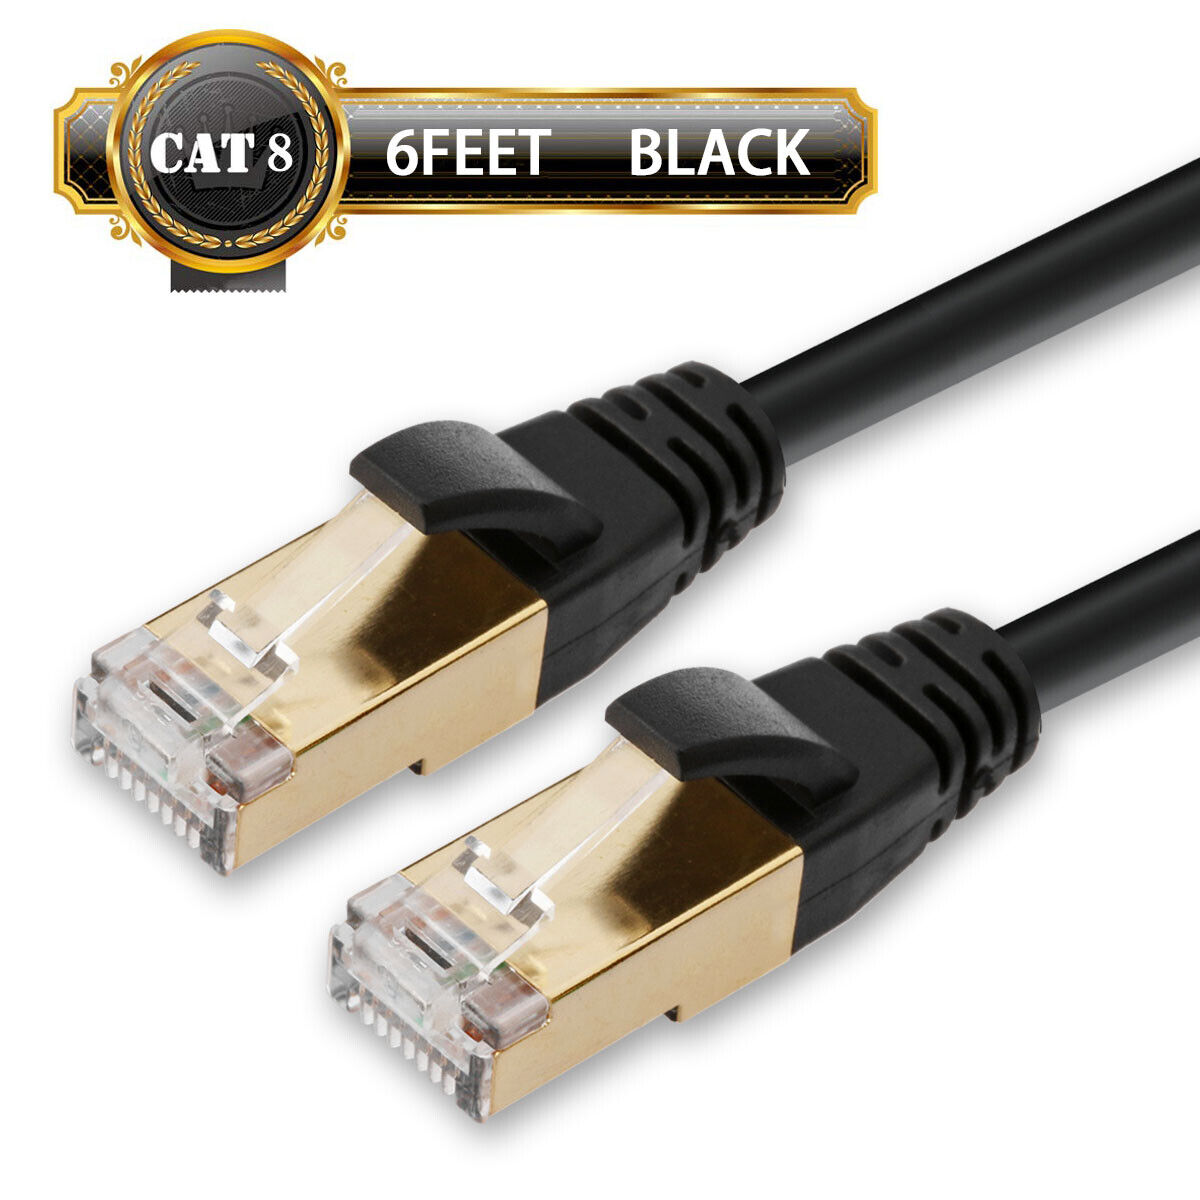 Cat 8 SFTP RJ45 Ethernet Cable Fast Gaming Cord for PS5/PS4, Xbox, Modem, Router